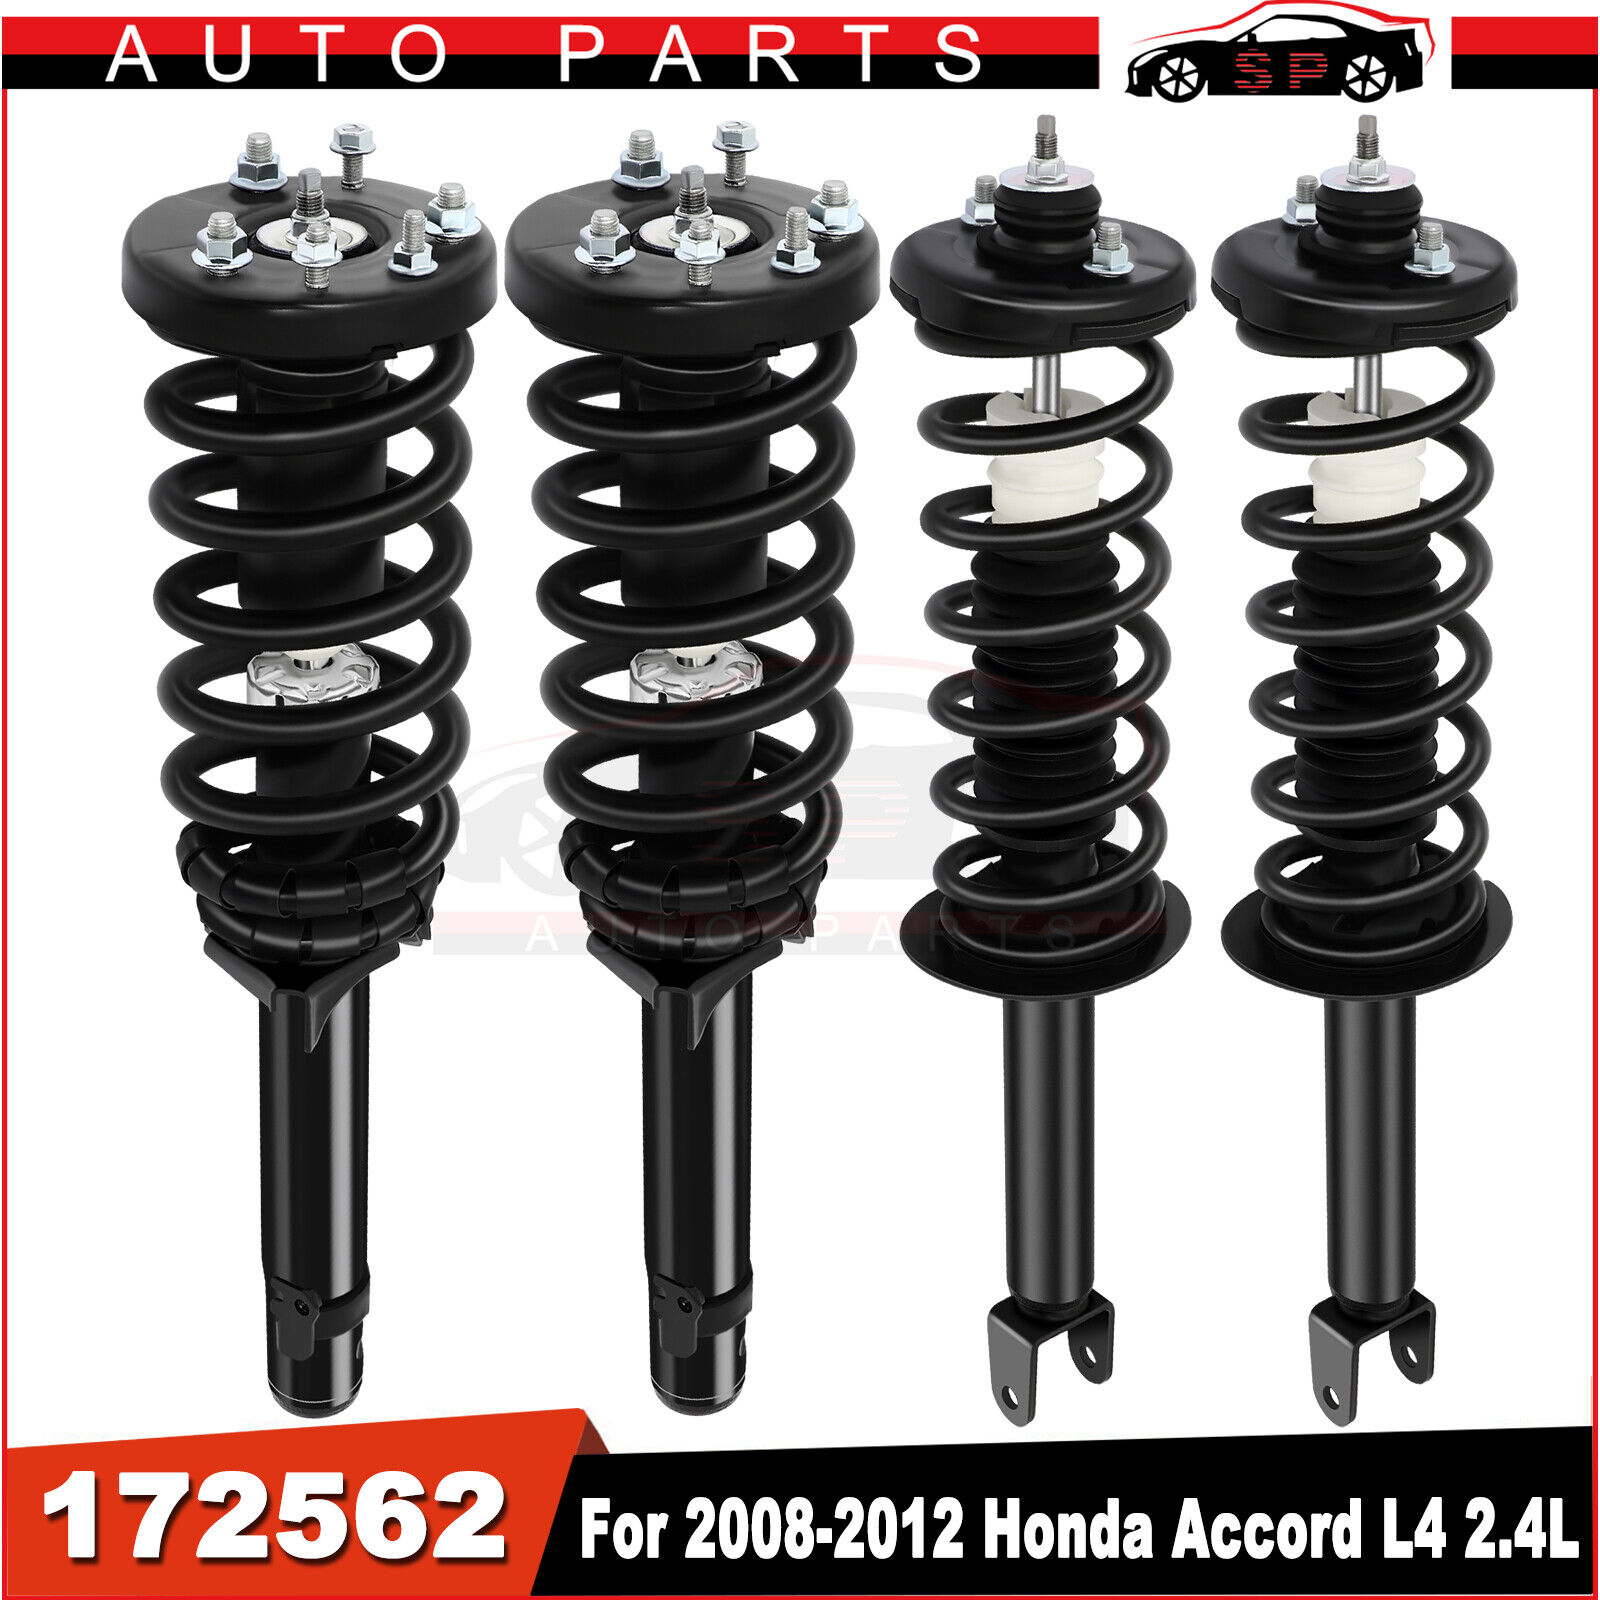 4 Pcs Complete Struts For 2008-2012 Honda Accord /Shocks & Coil Spring Assembly